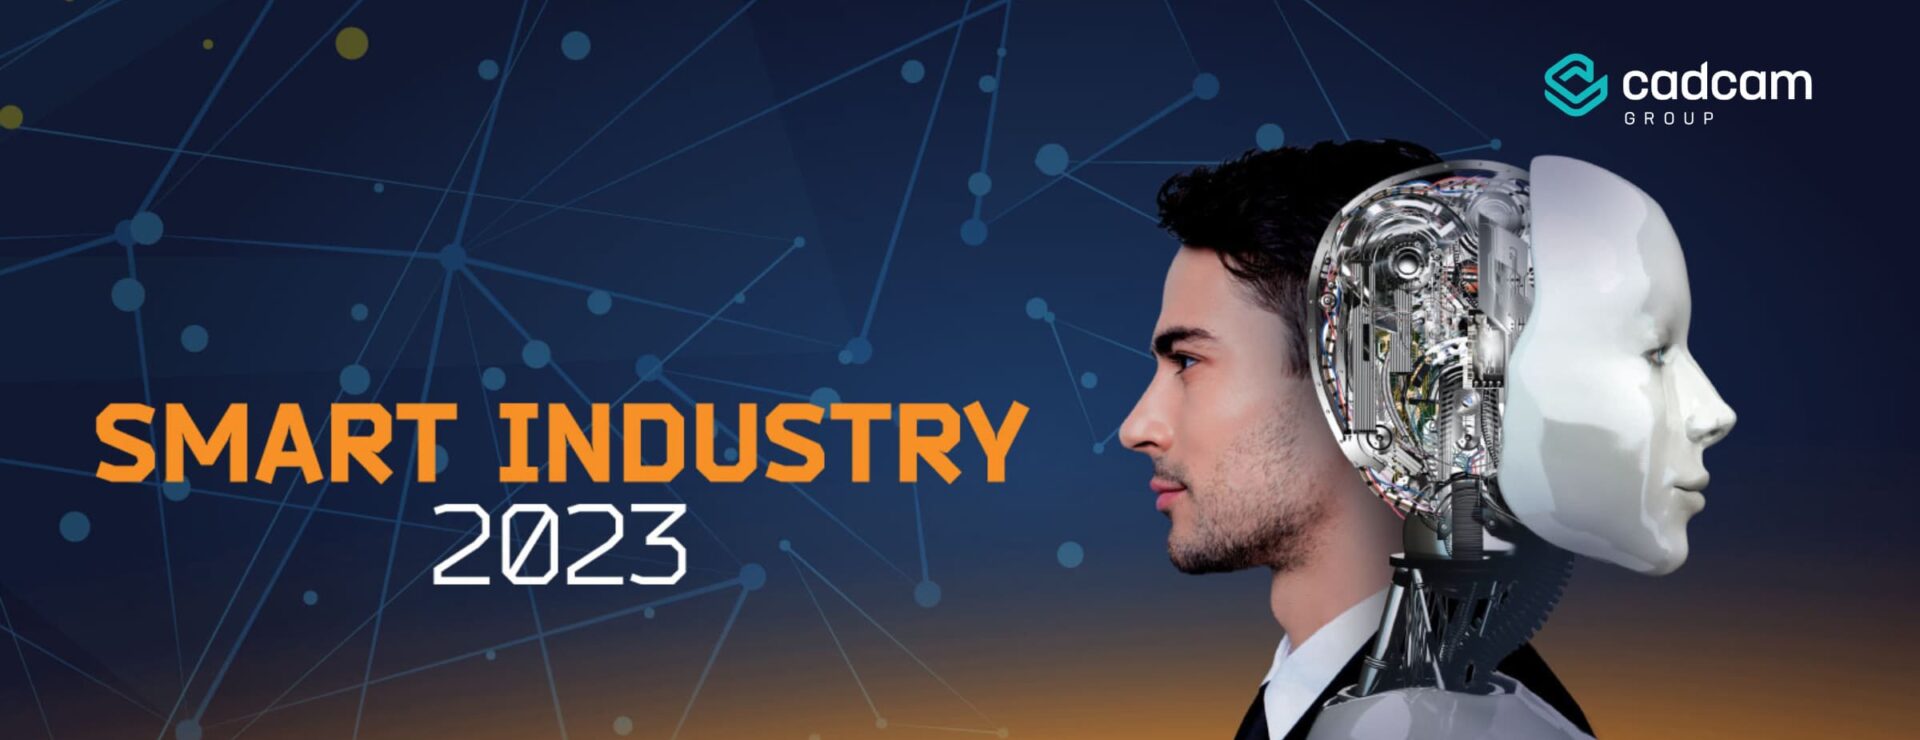 smart industry 2023 CADCAM Group